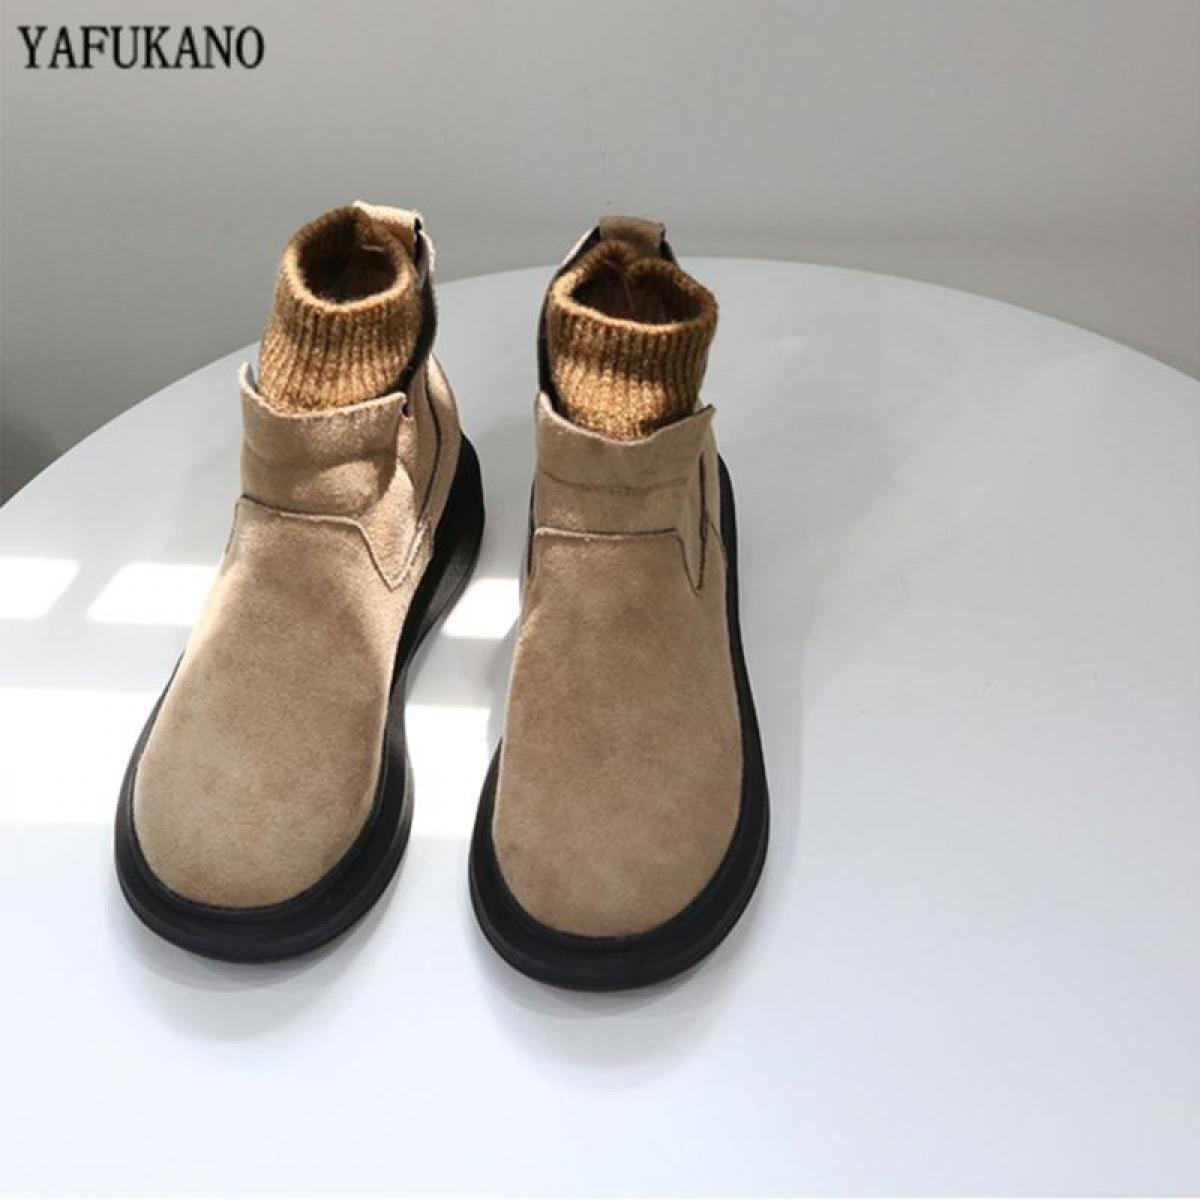 Mori Girl Literary Women Boots Retro Woolen Tube Round Toe Thicksoled Women's Ankle Boots Handmade Comfort Casual Short 